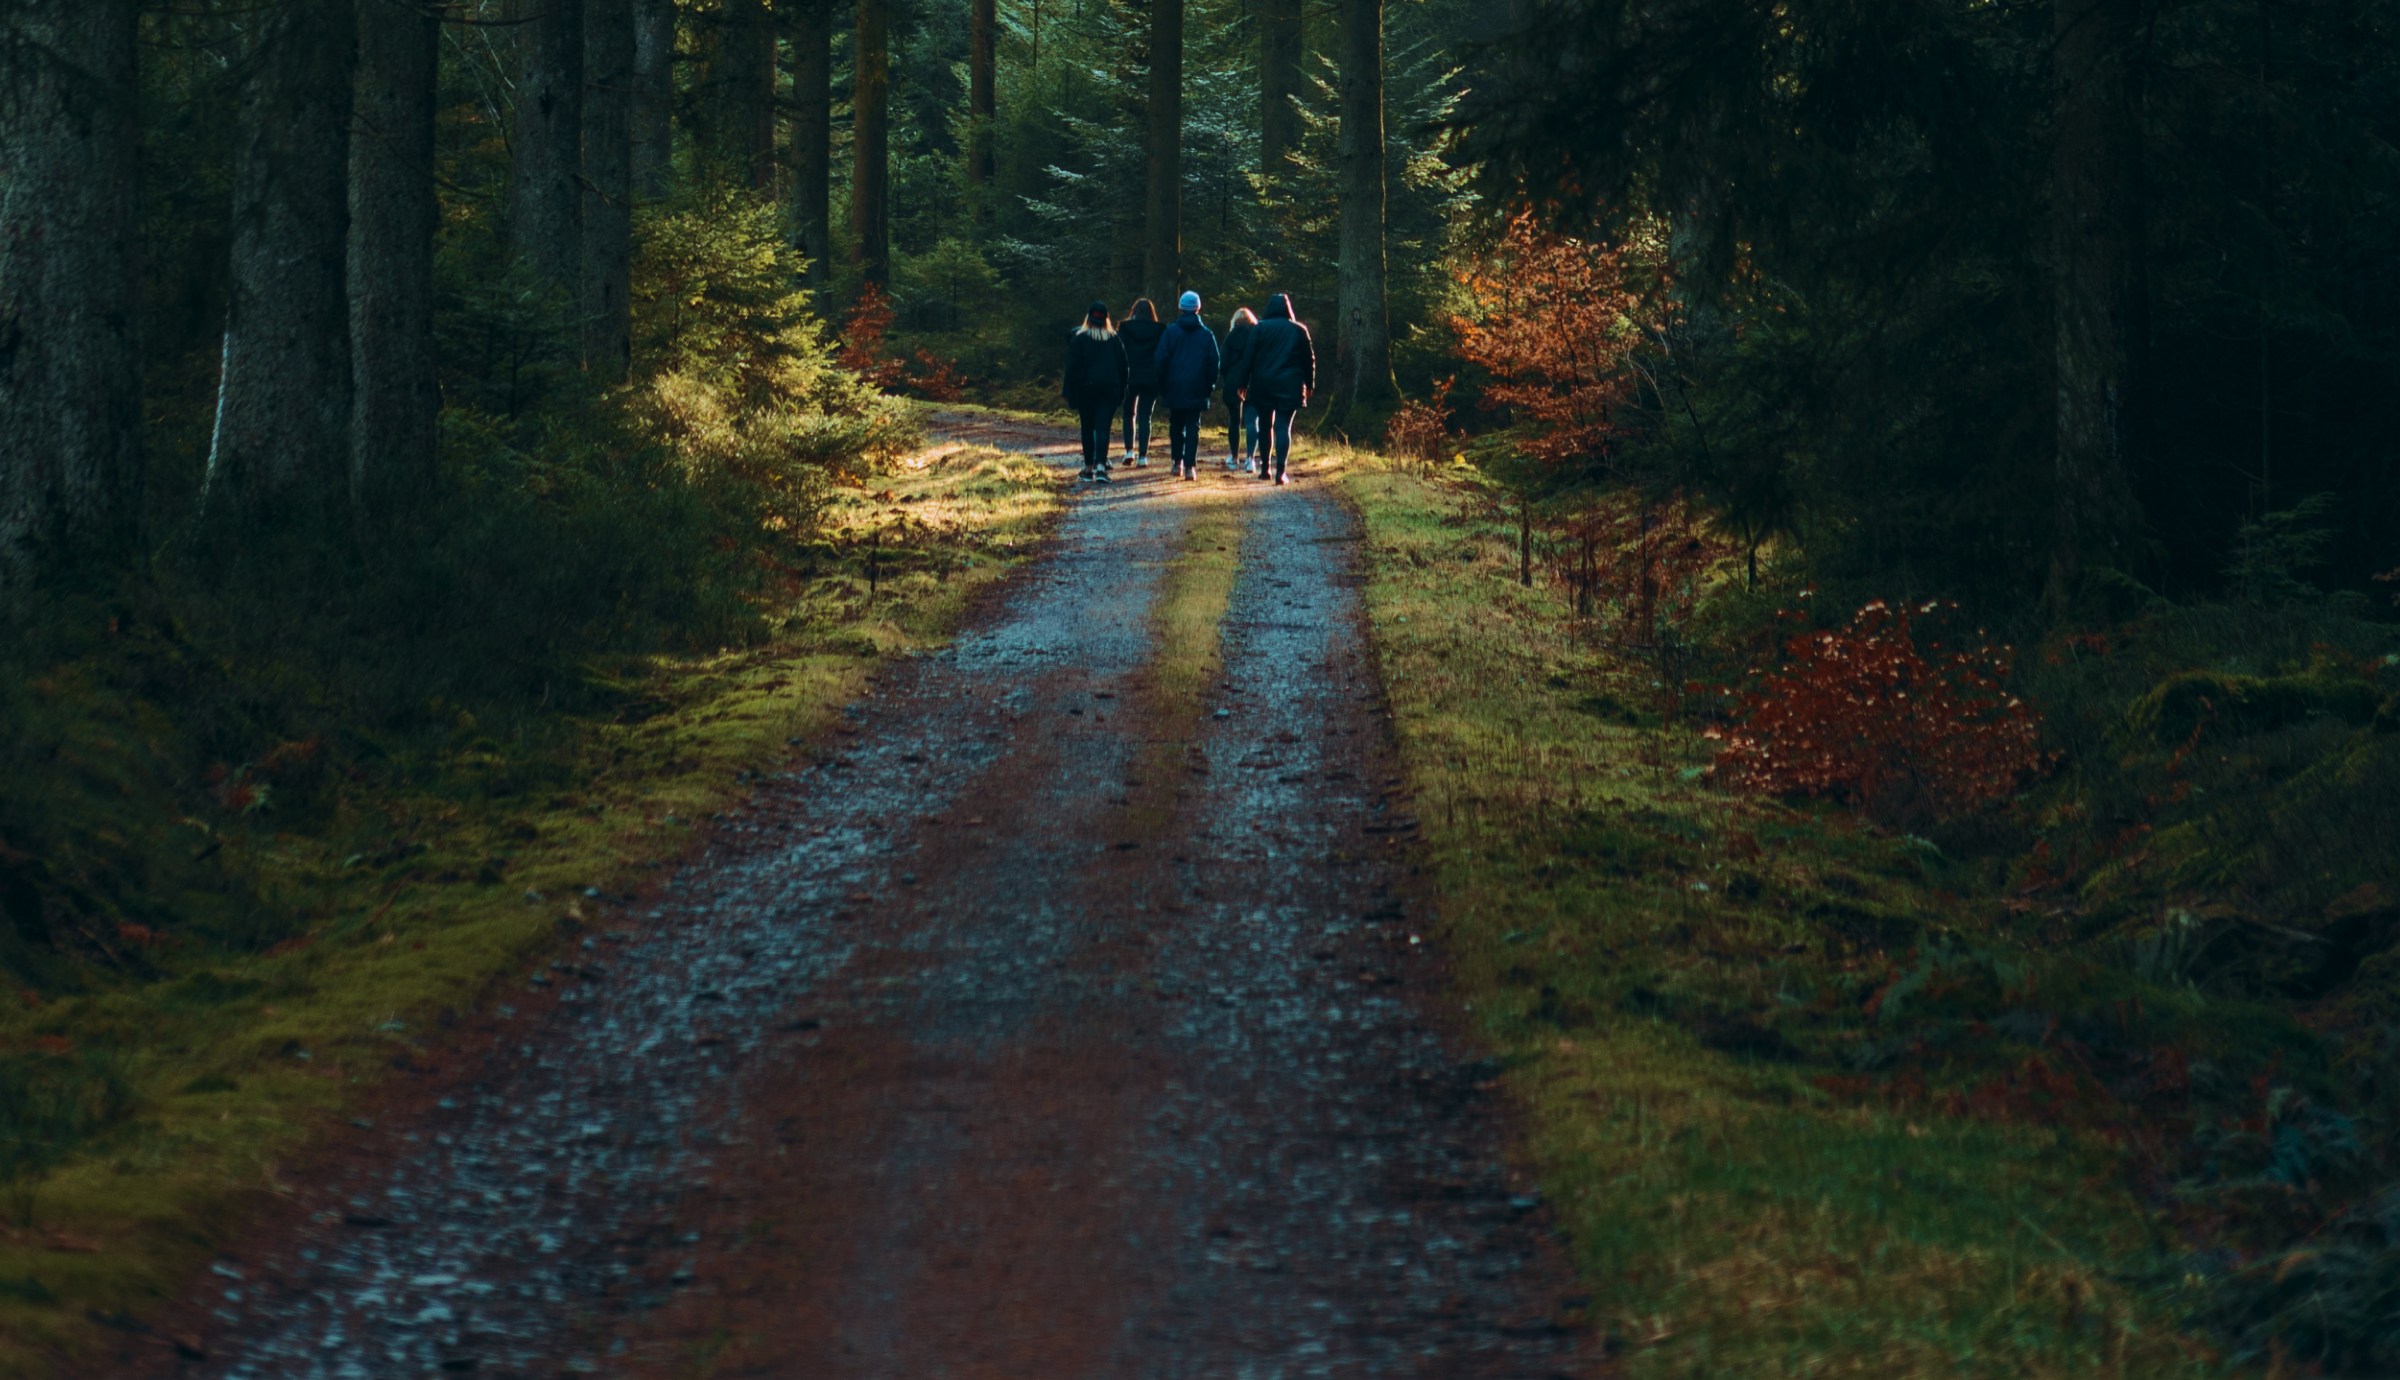 Group of people walking down forest path